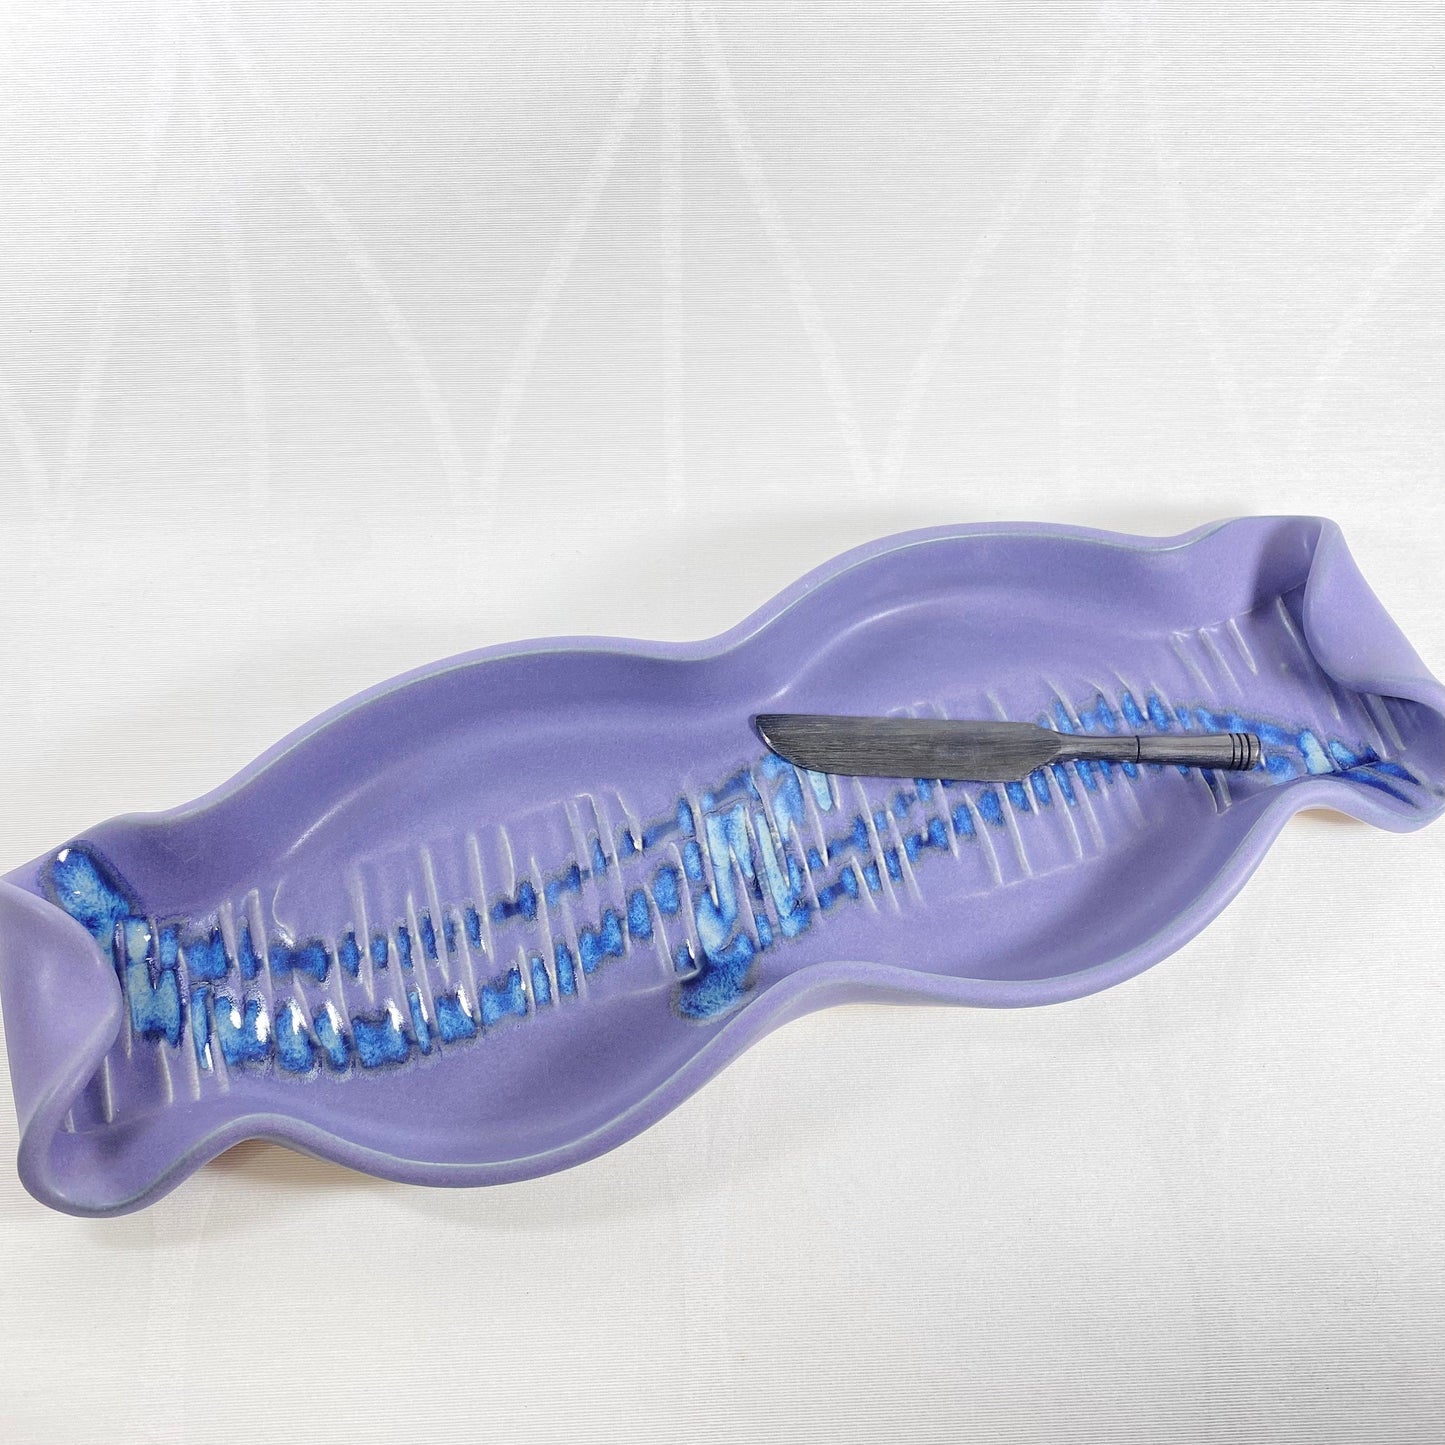 Handmade Purple and Blue Baguette Tray with Small Knife, Functional and Decorative Pottery